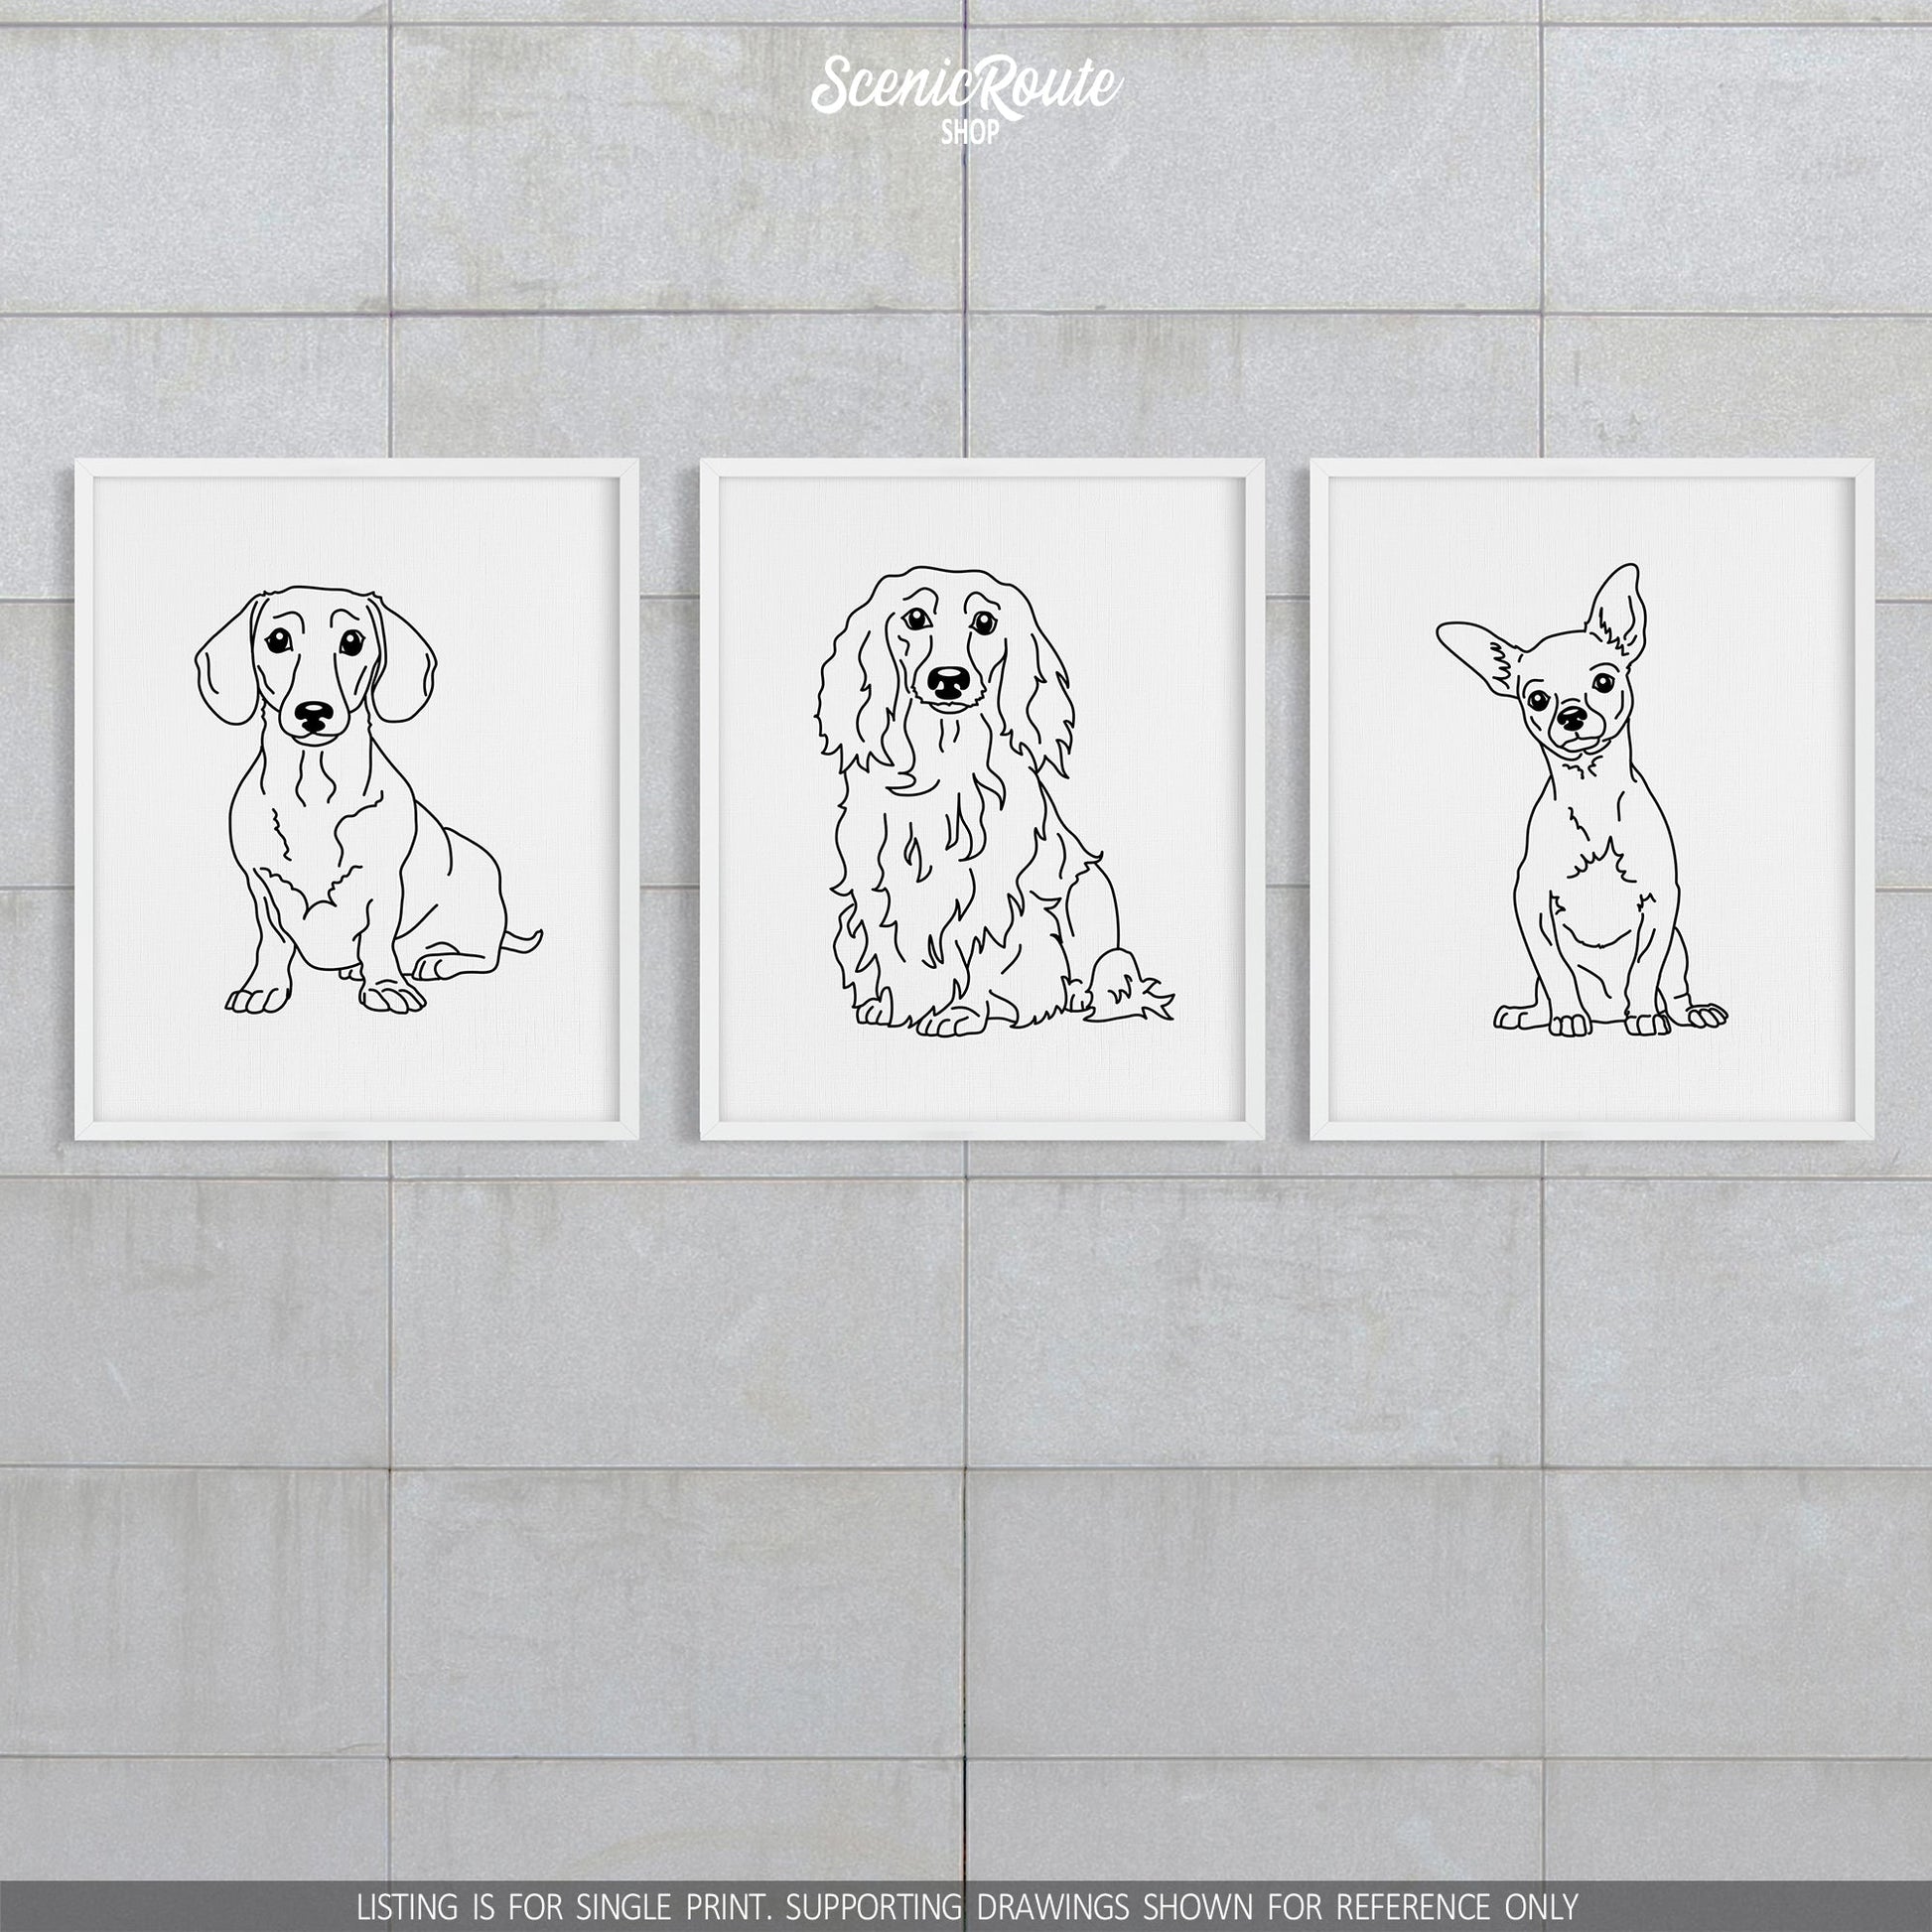 A group of three framed drawings on a block wall.  The line art drawings include a Dachshund dog, a Long Haired Dachshund dog, and a Chihuahua dog